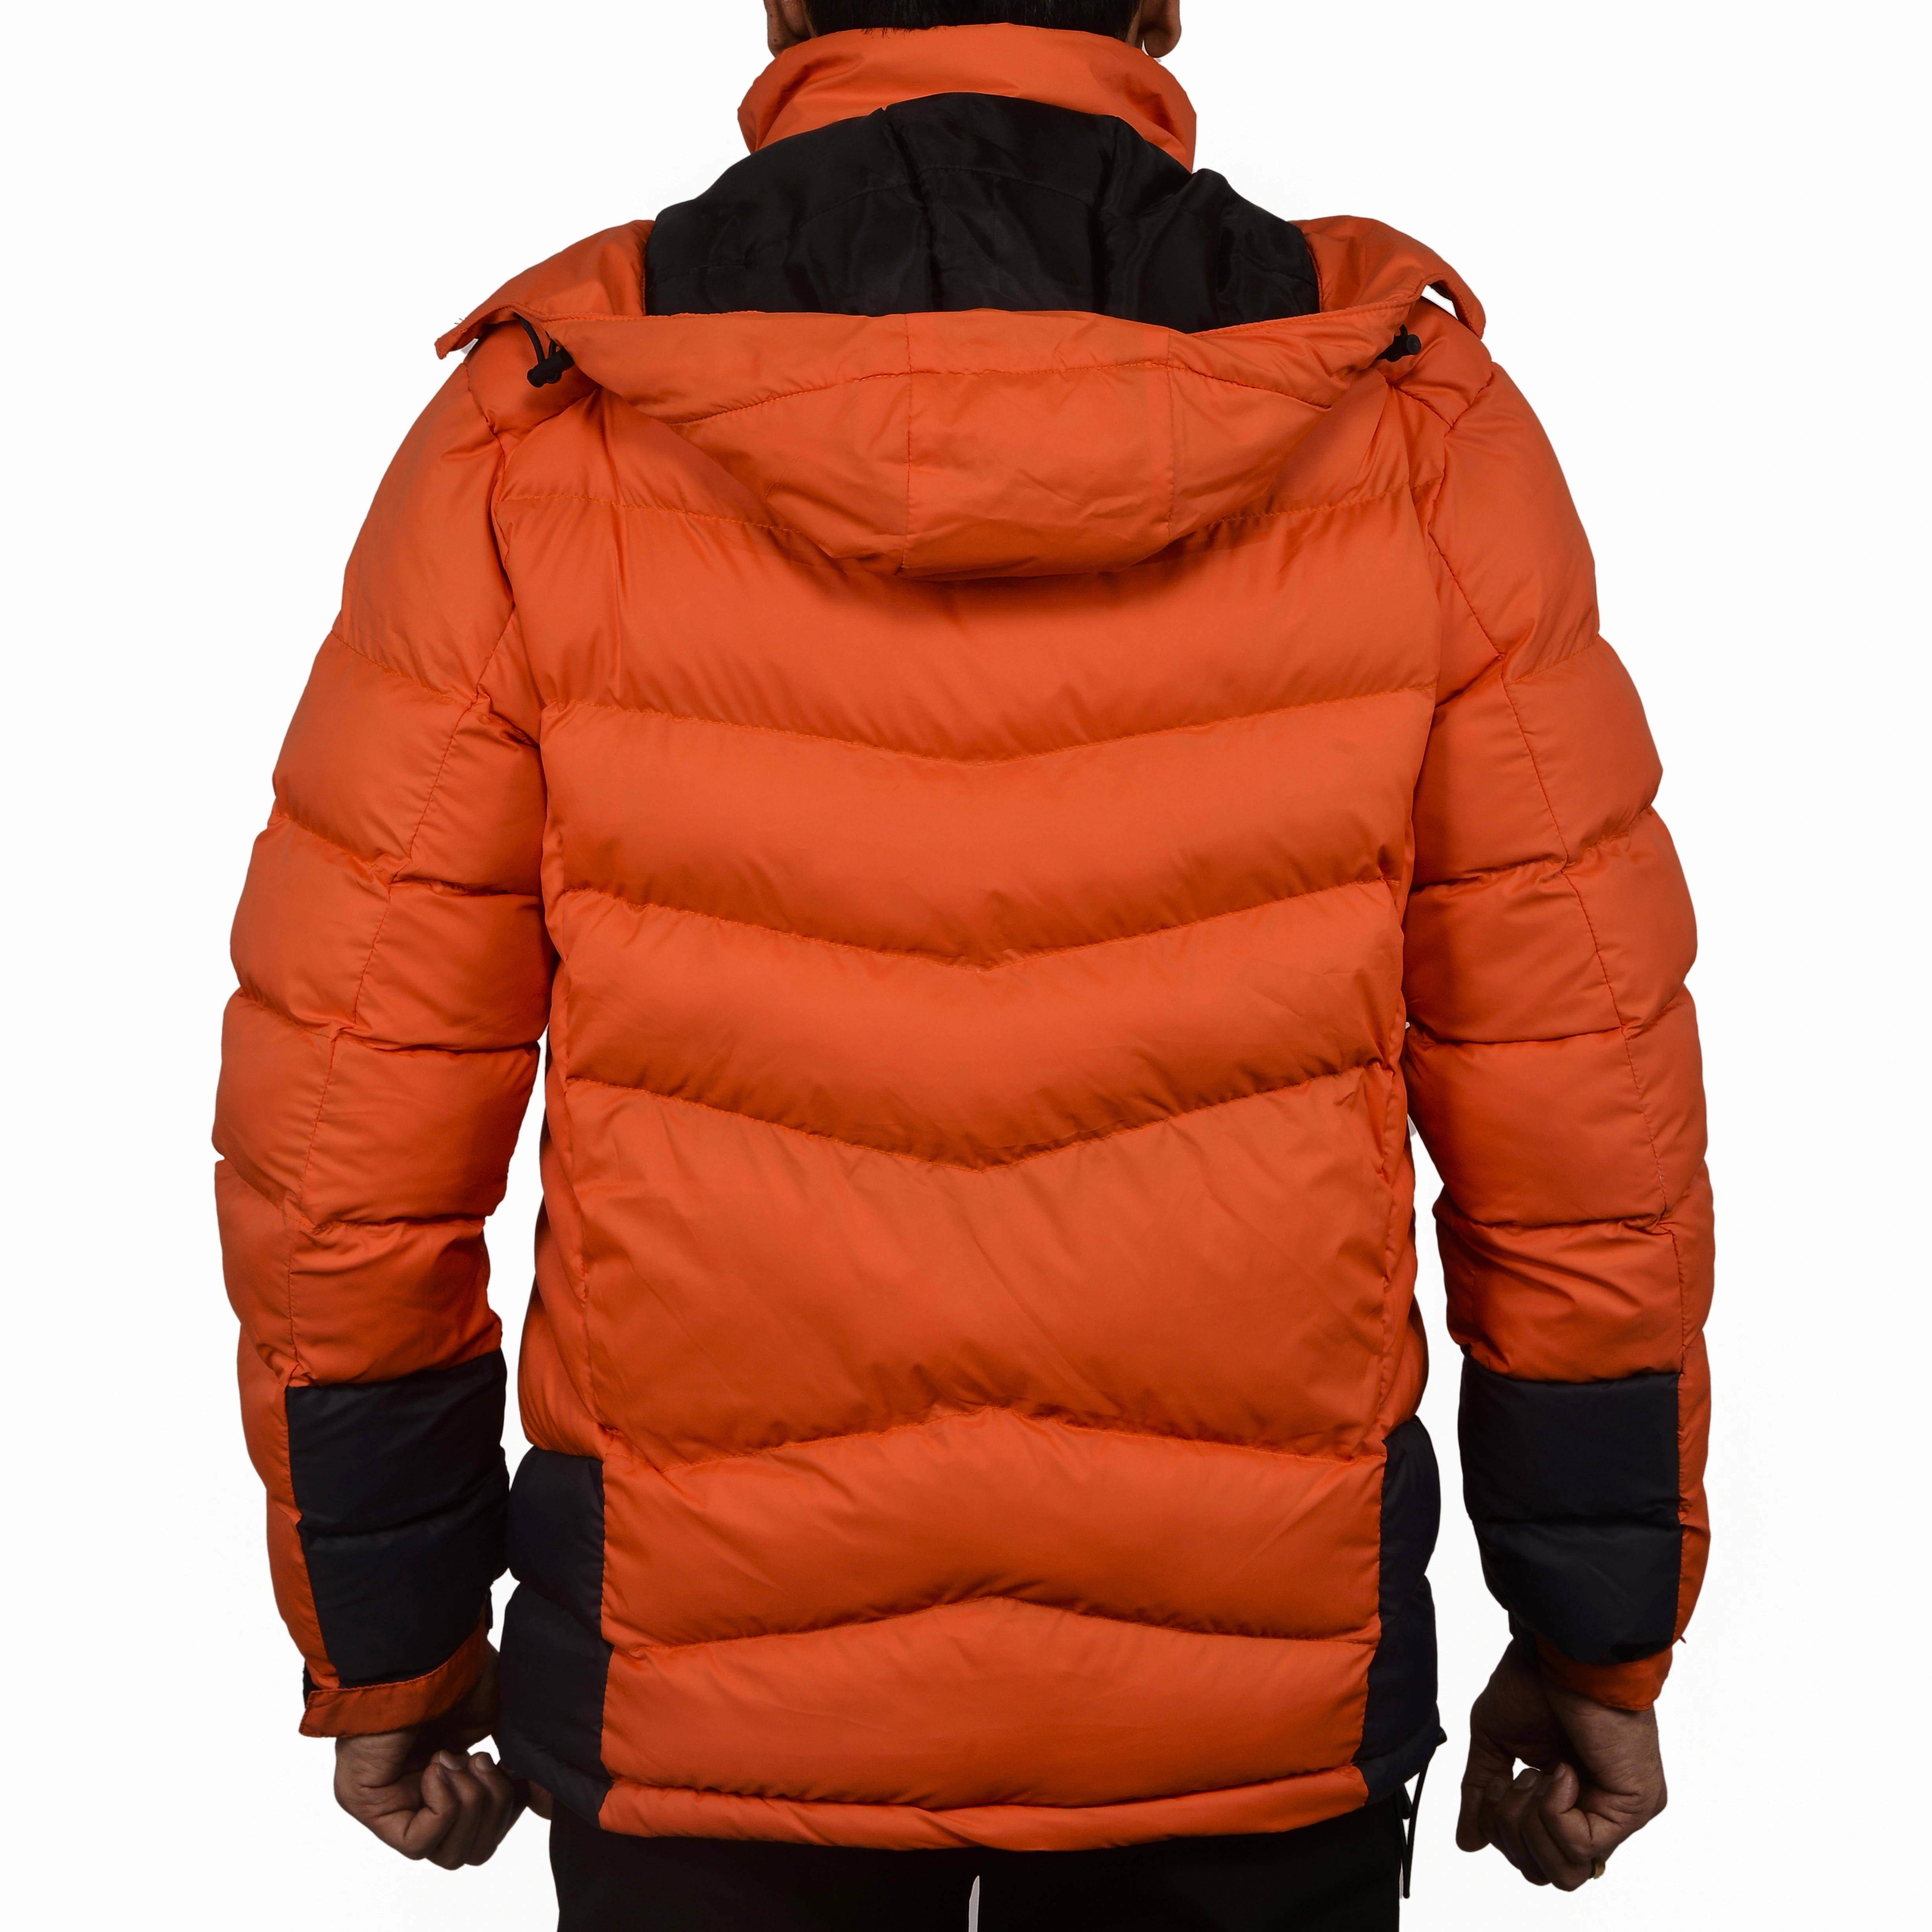 K2 Survivor Down Jacket for Men: Stylized Functionality for Extreme Cold Weather Expeditions (Up to -20°C)-XL-Orange-4